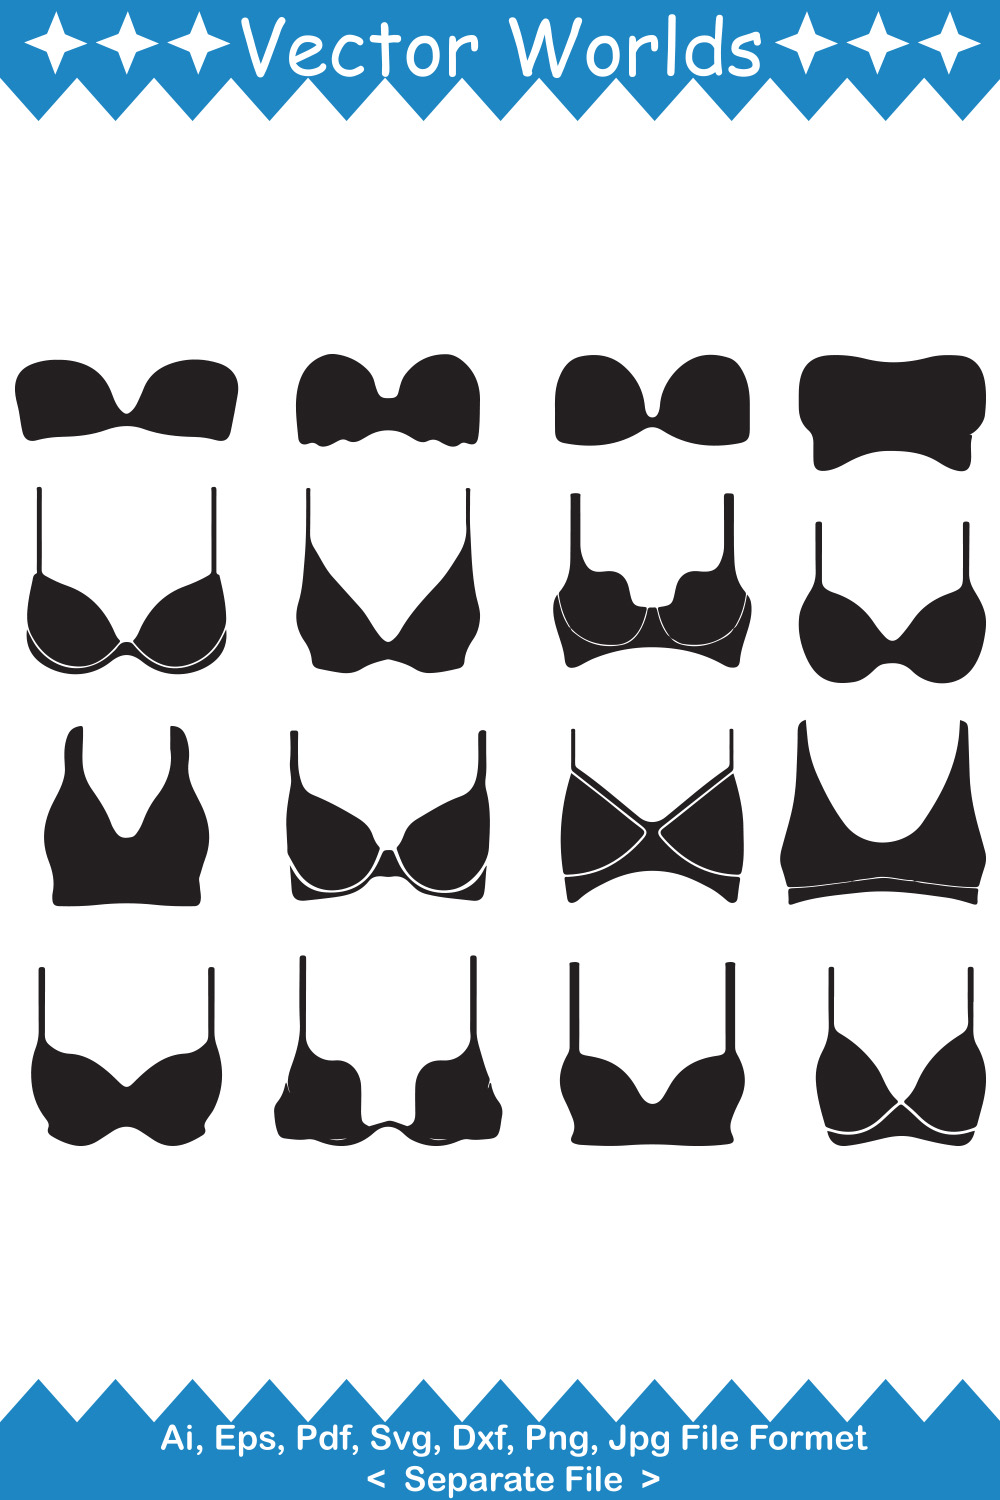 A selection of wonderful images of bra silhouettes.